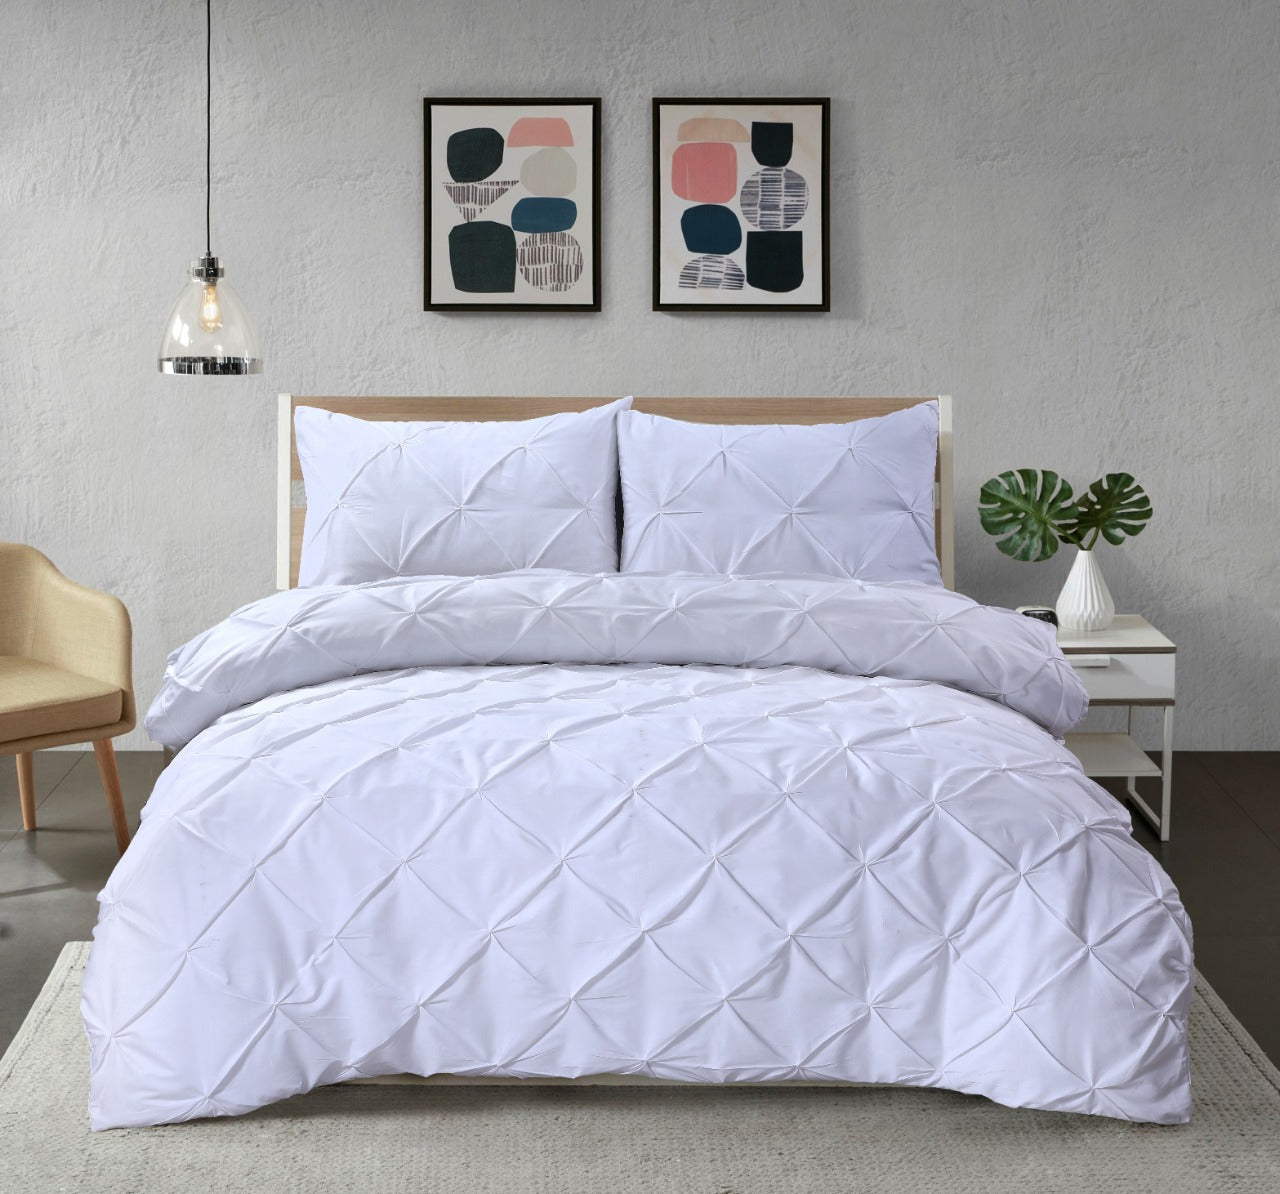 Pintuck Duvet Cover Set with Pillow Cases (Wholesale)